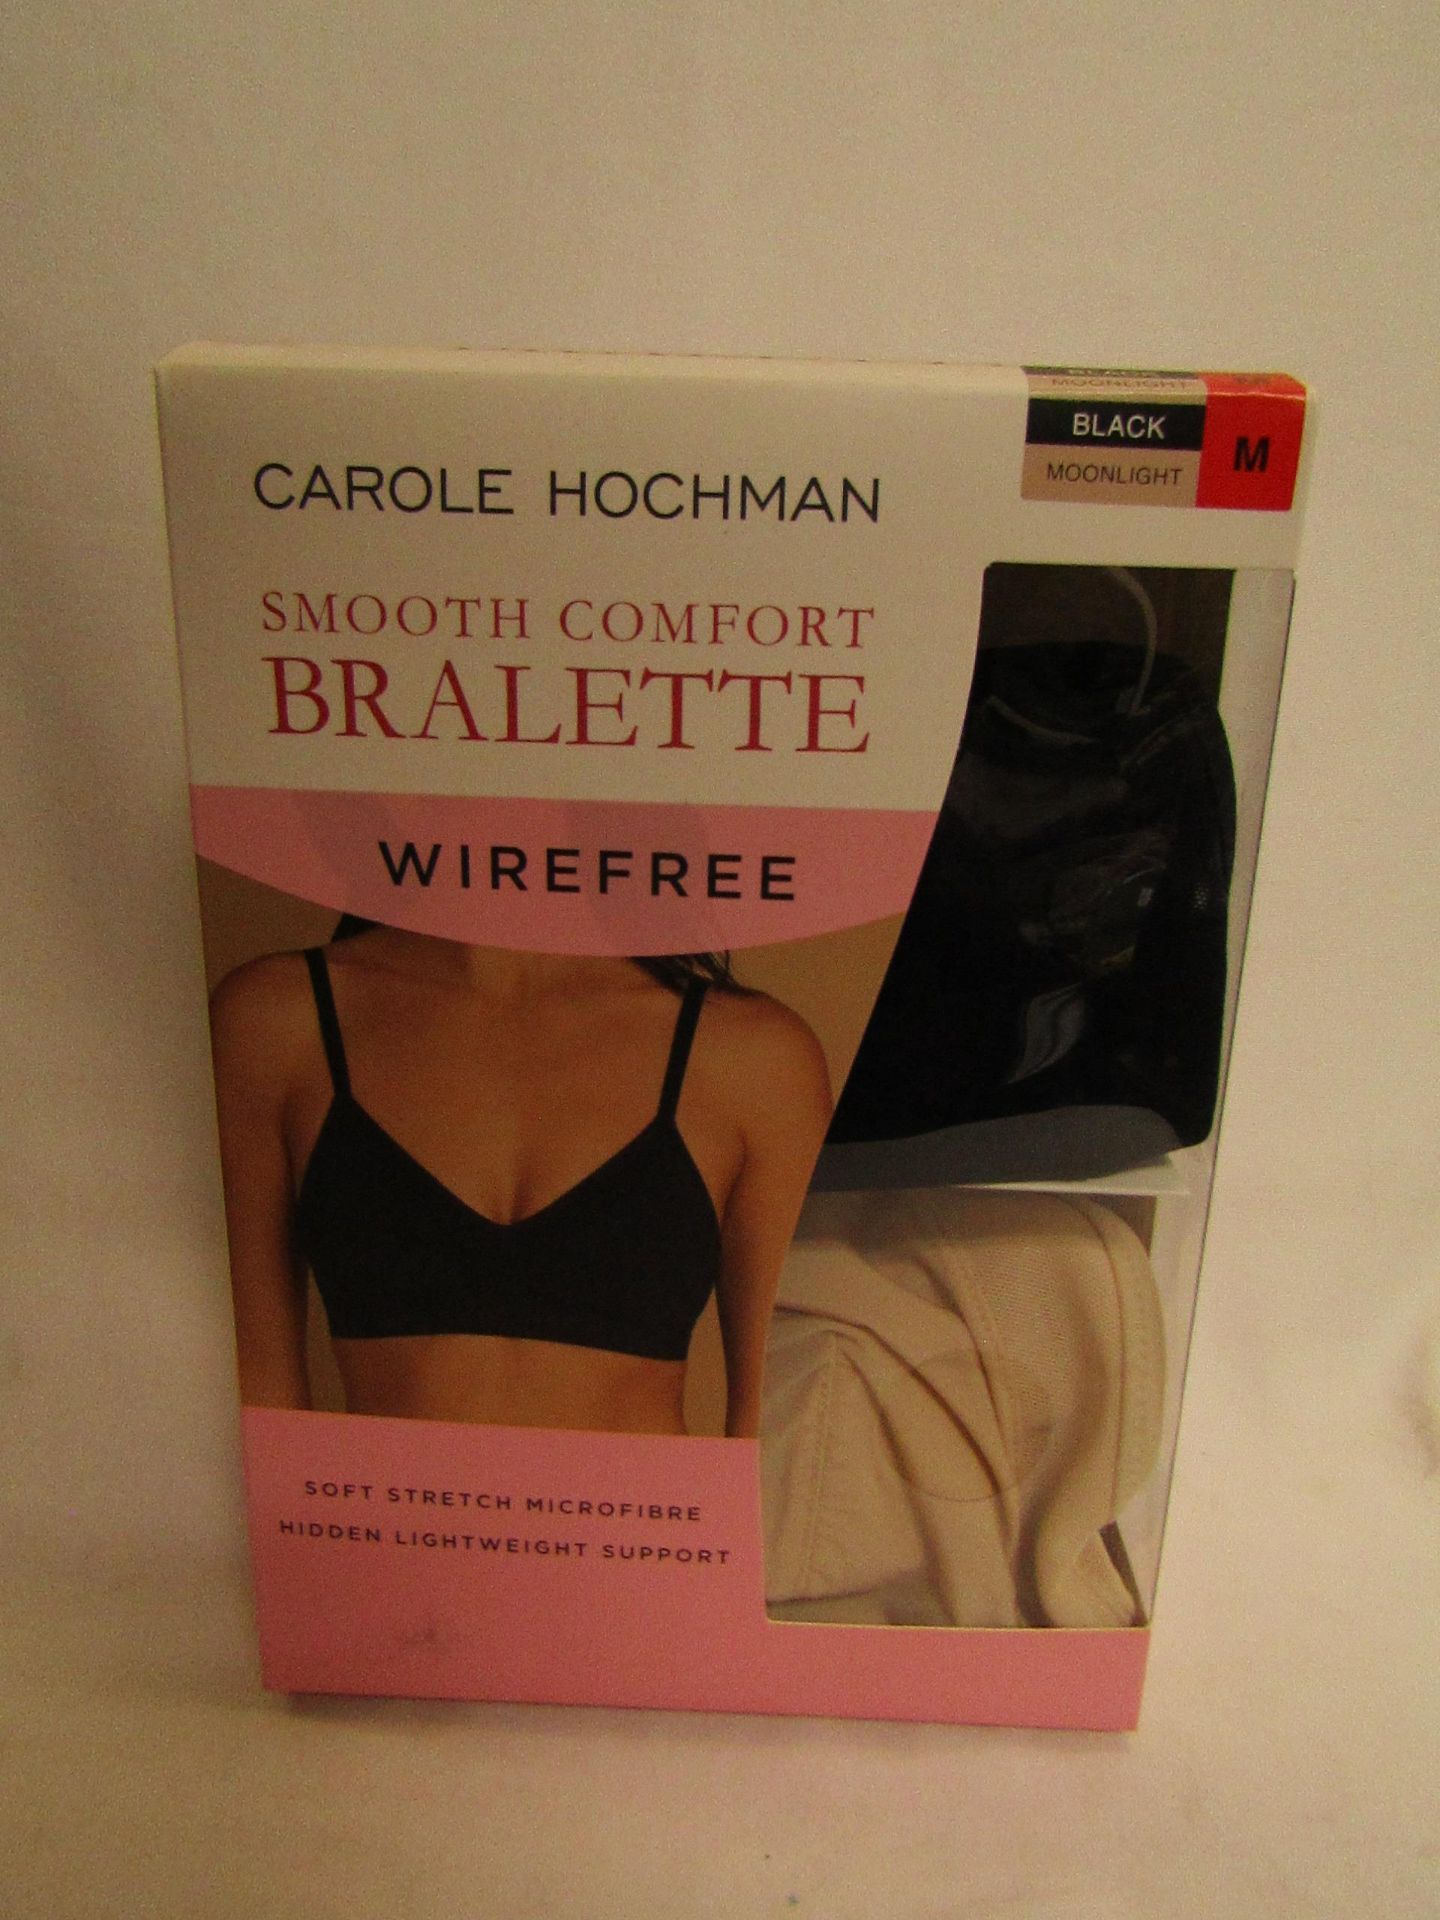 1 X PK of 2 Carole Hochman Wirefree Bralette Size M New & Boxed (Picked at Randon So Colours Will